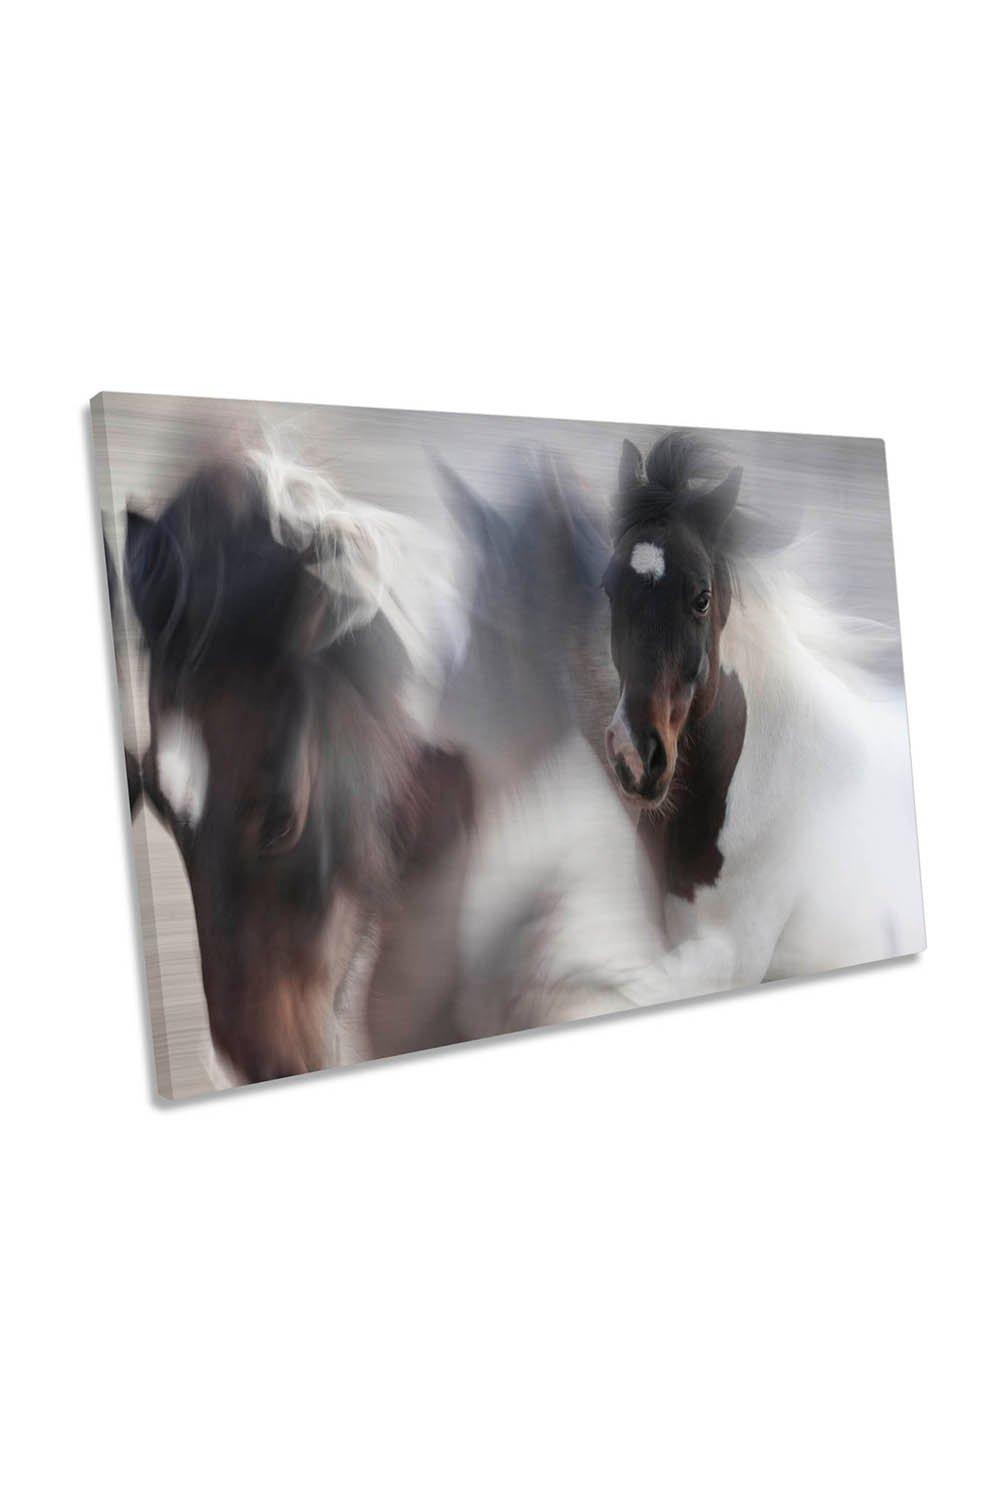 Runaway Horse Animal Abstract Canvas Wall Art Picture Print